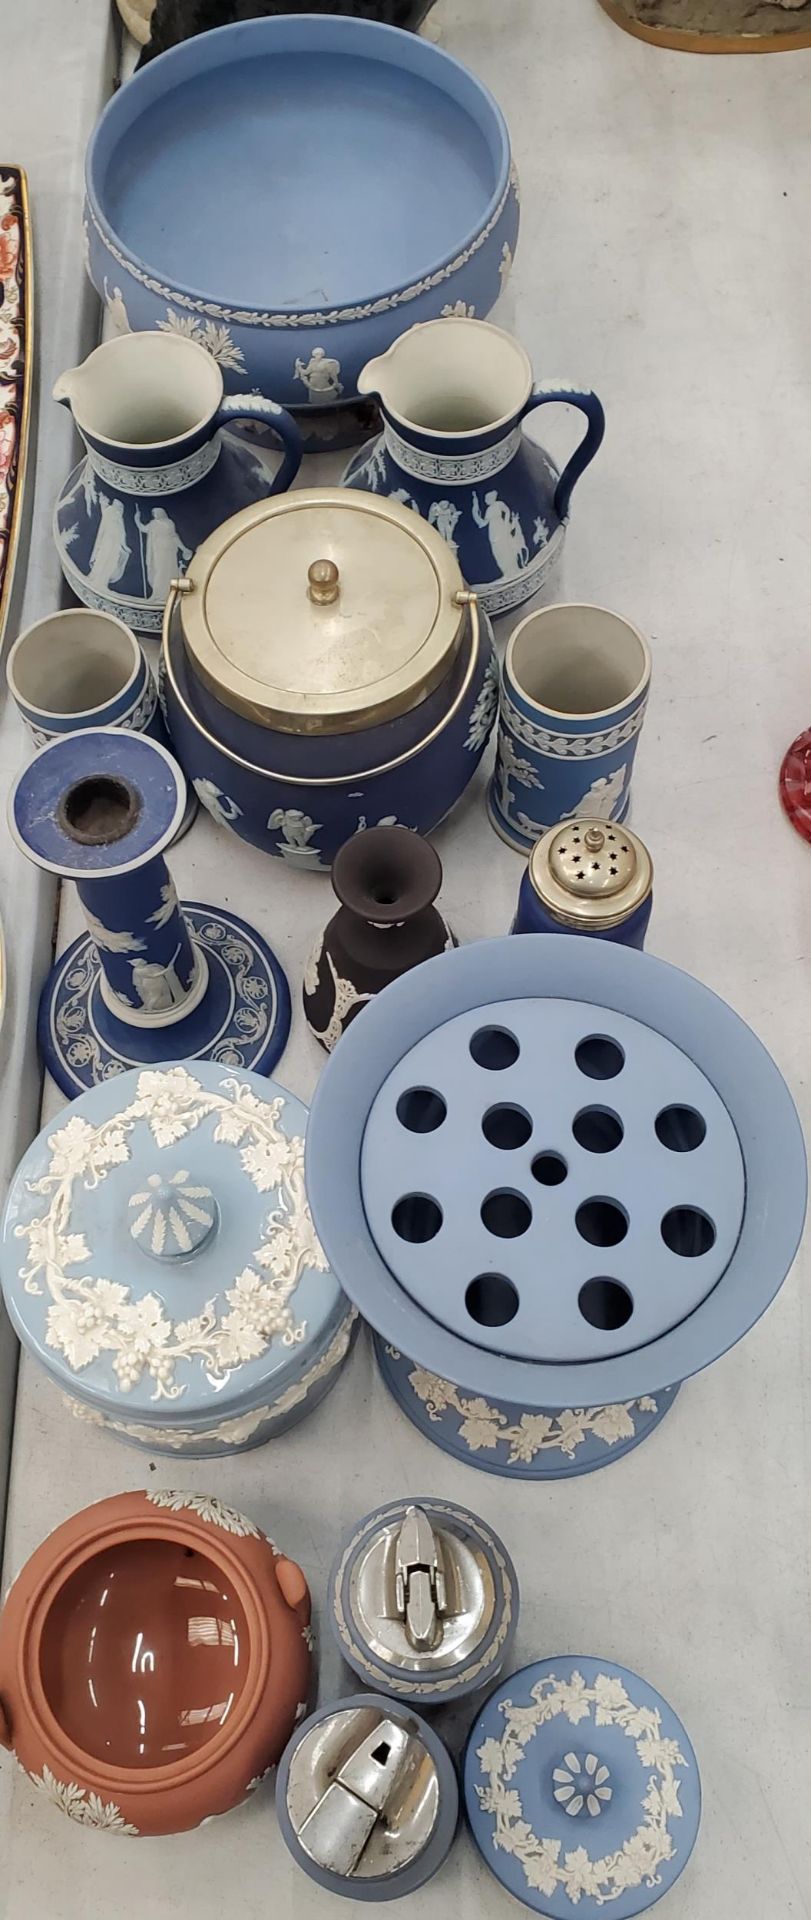 A LARGE QUANTITY OF WEDGWOOD AND WEDGWOOD STYLE JASPERWARE TO INCLUDE DARK BLUE, BLACK AND